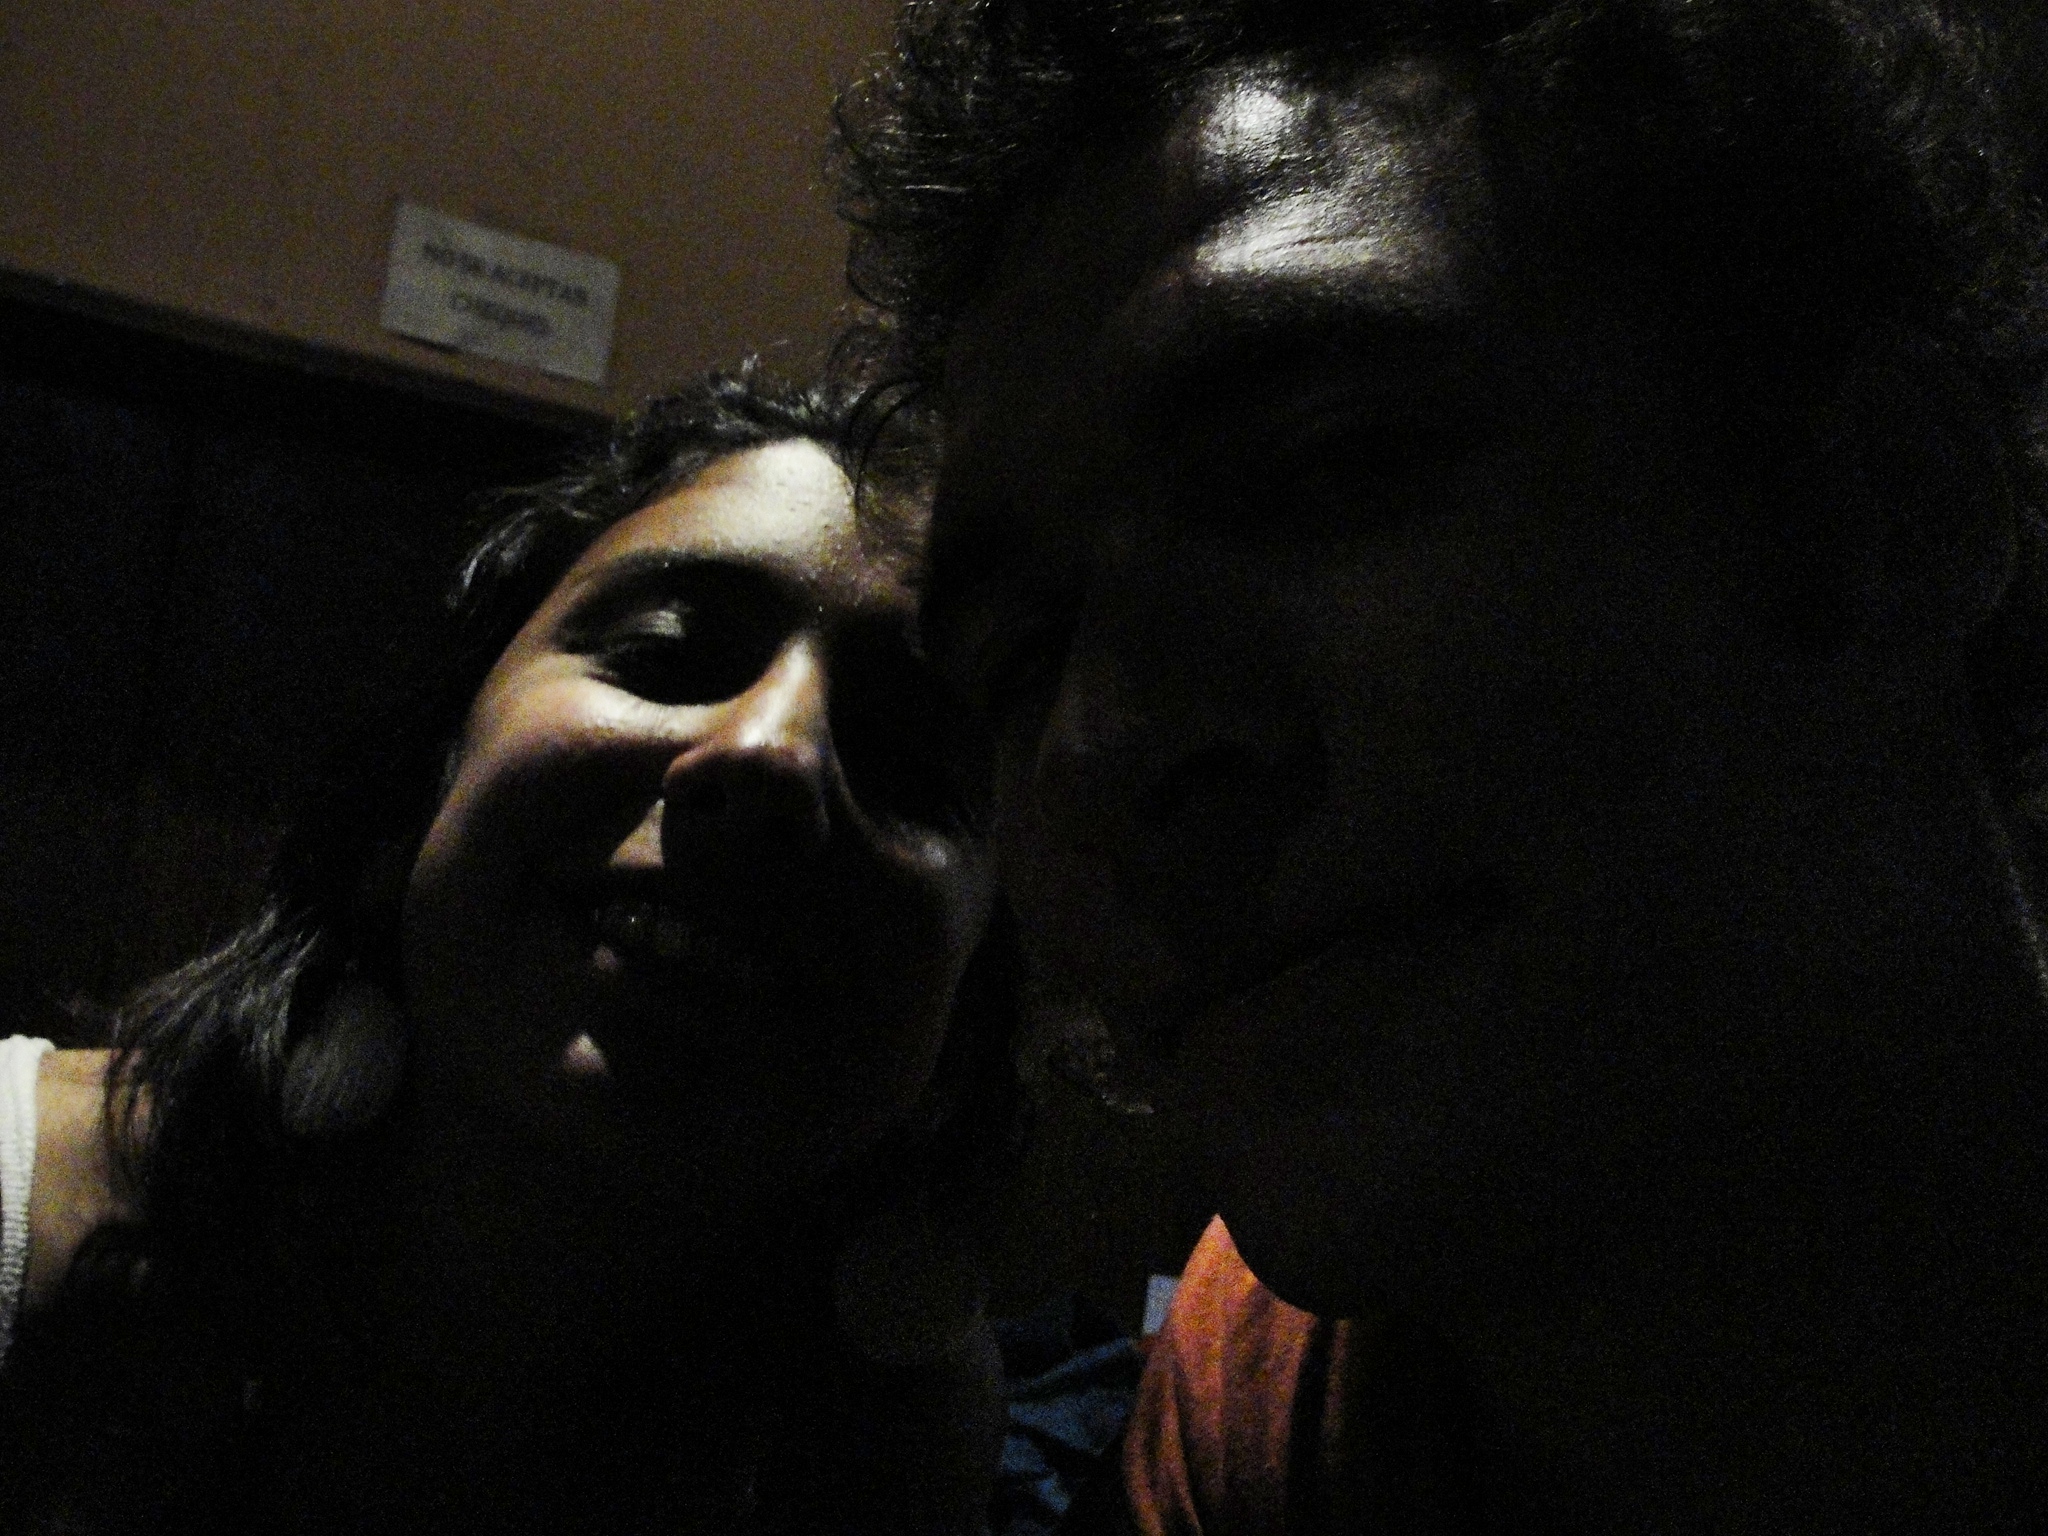 two people posing for the camera in a dark room